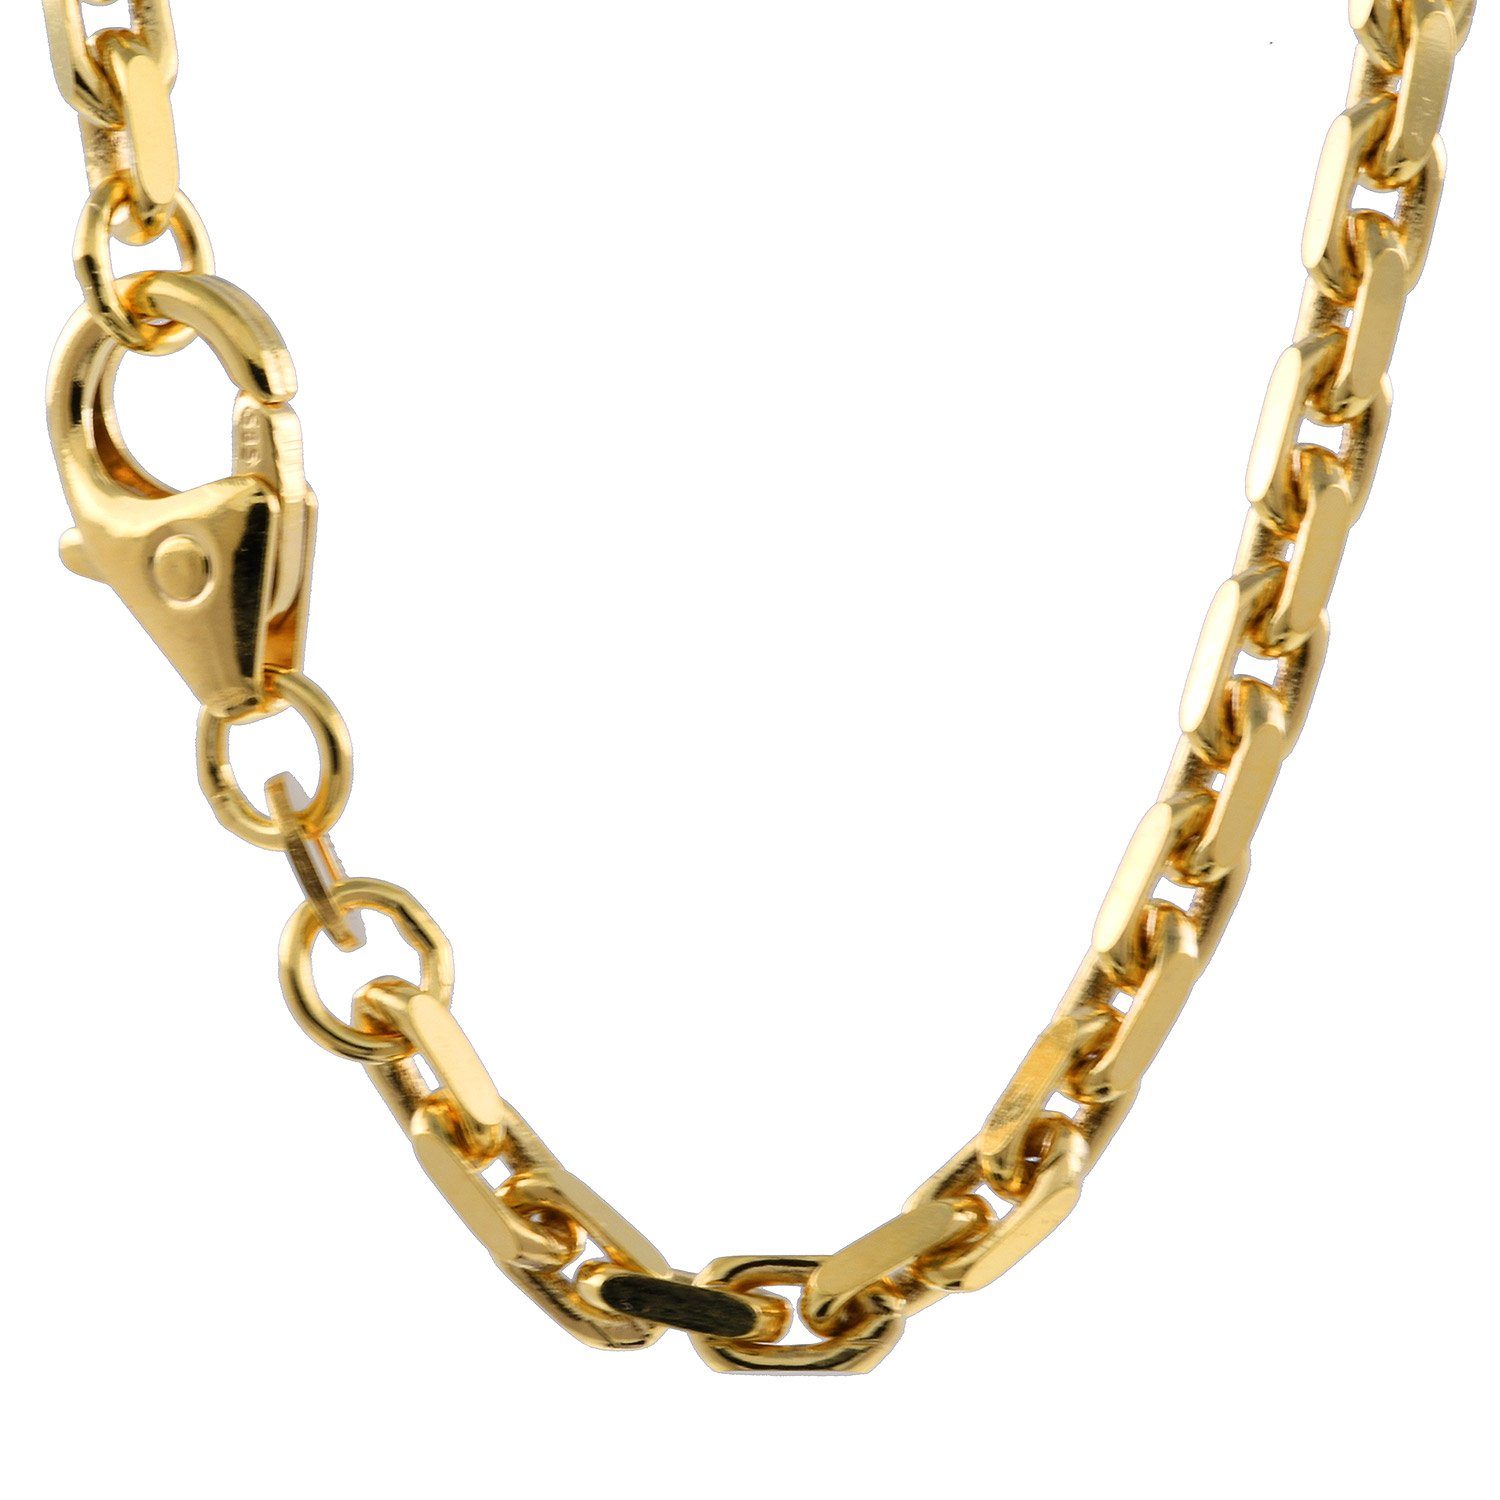 Goldkette, in Made HOPLO Germany